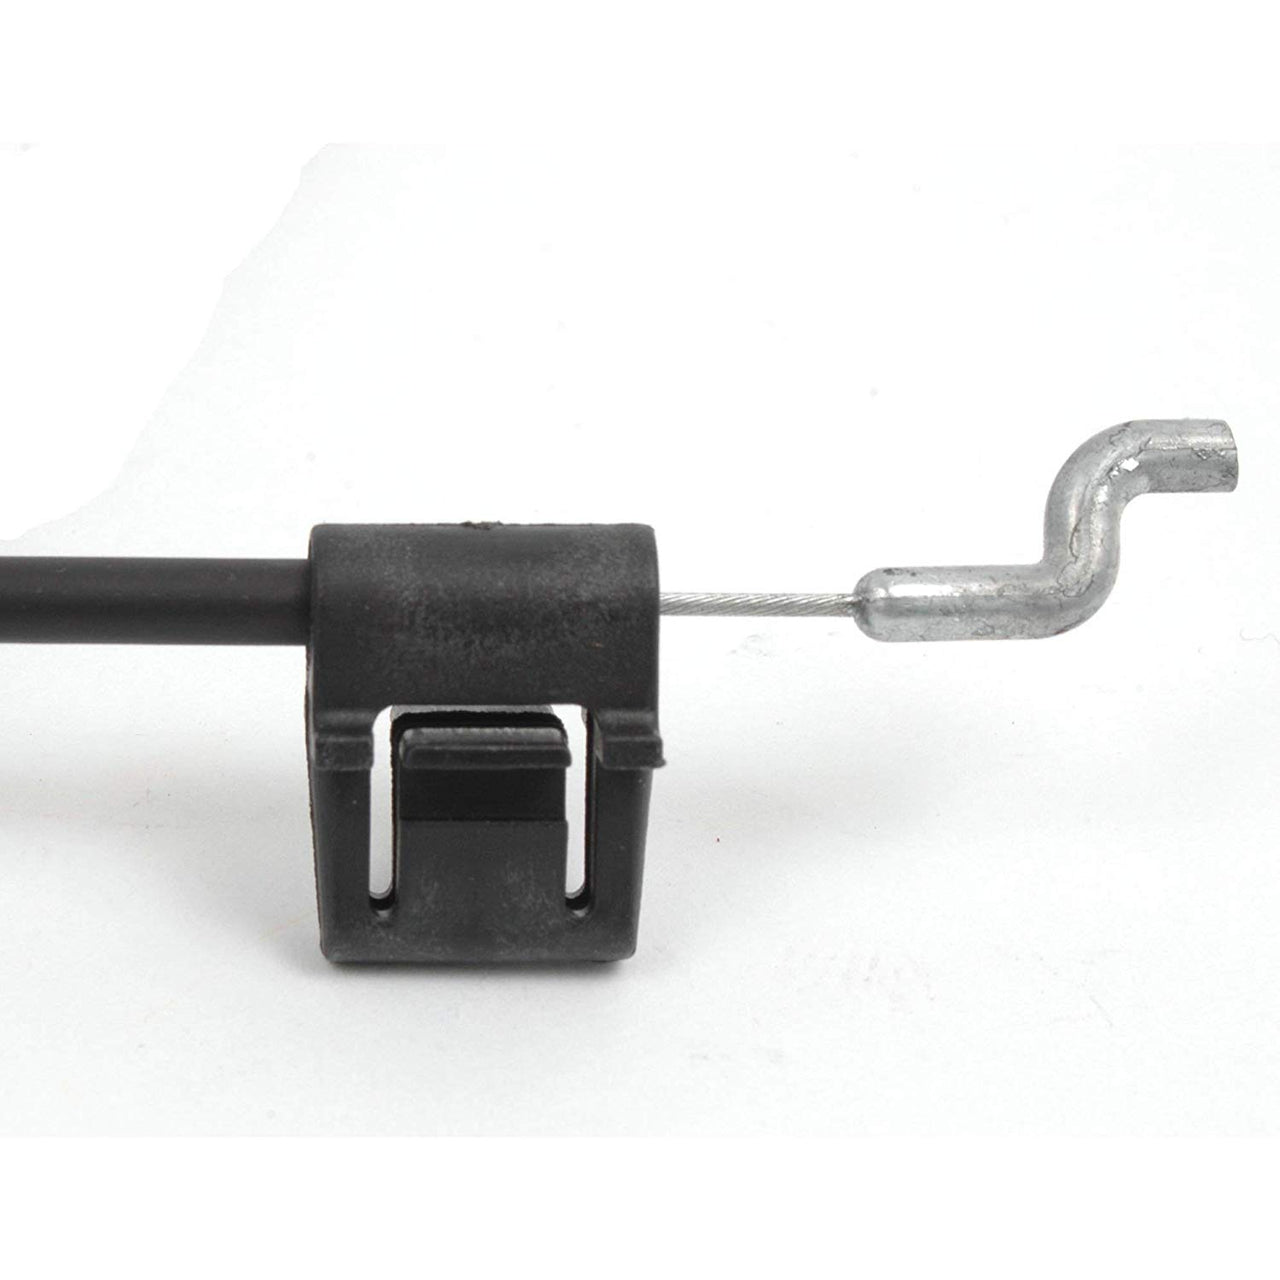 Recliner Parts: 38-1/4" Black D Ring Pull Cable Assembly